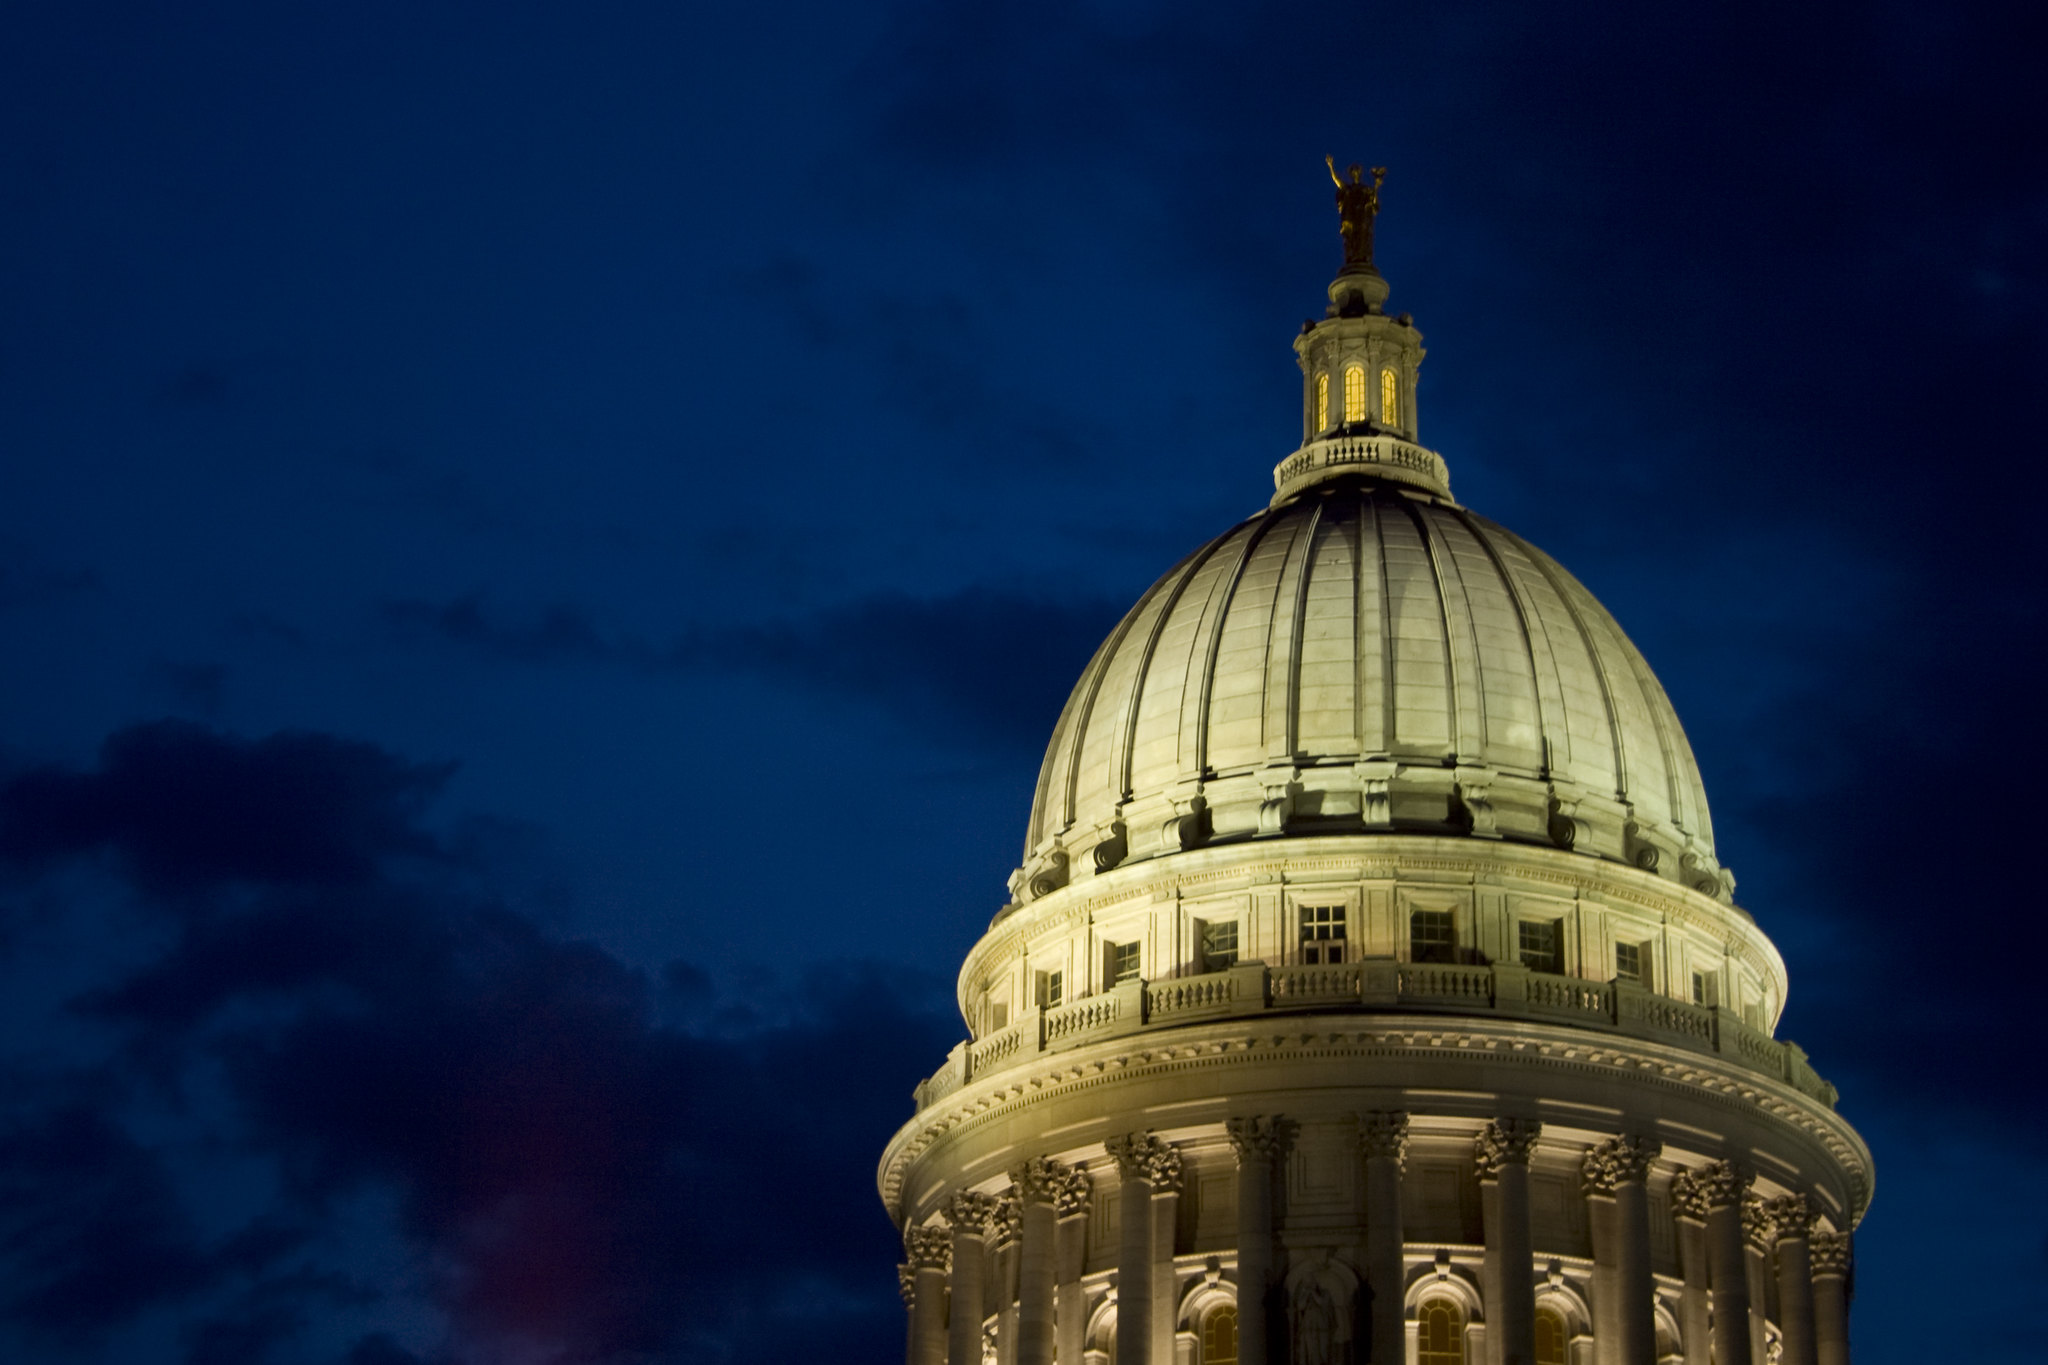 The dome of the Wisconsin state capital building lit up at night with a dark navy blue sky.